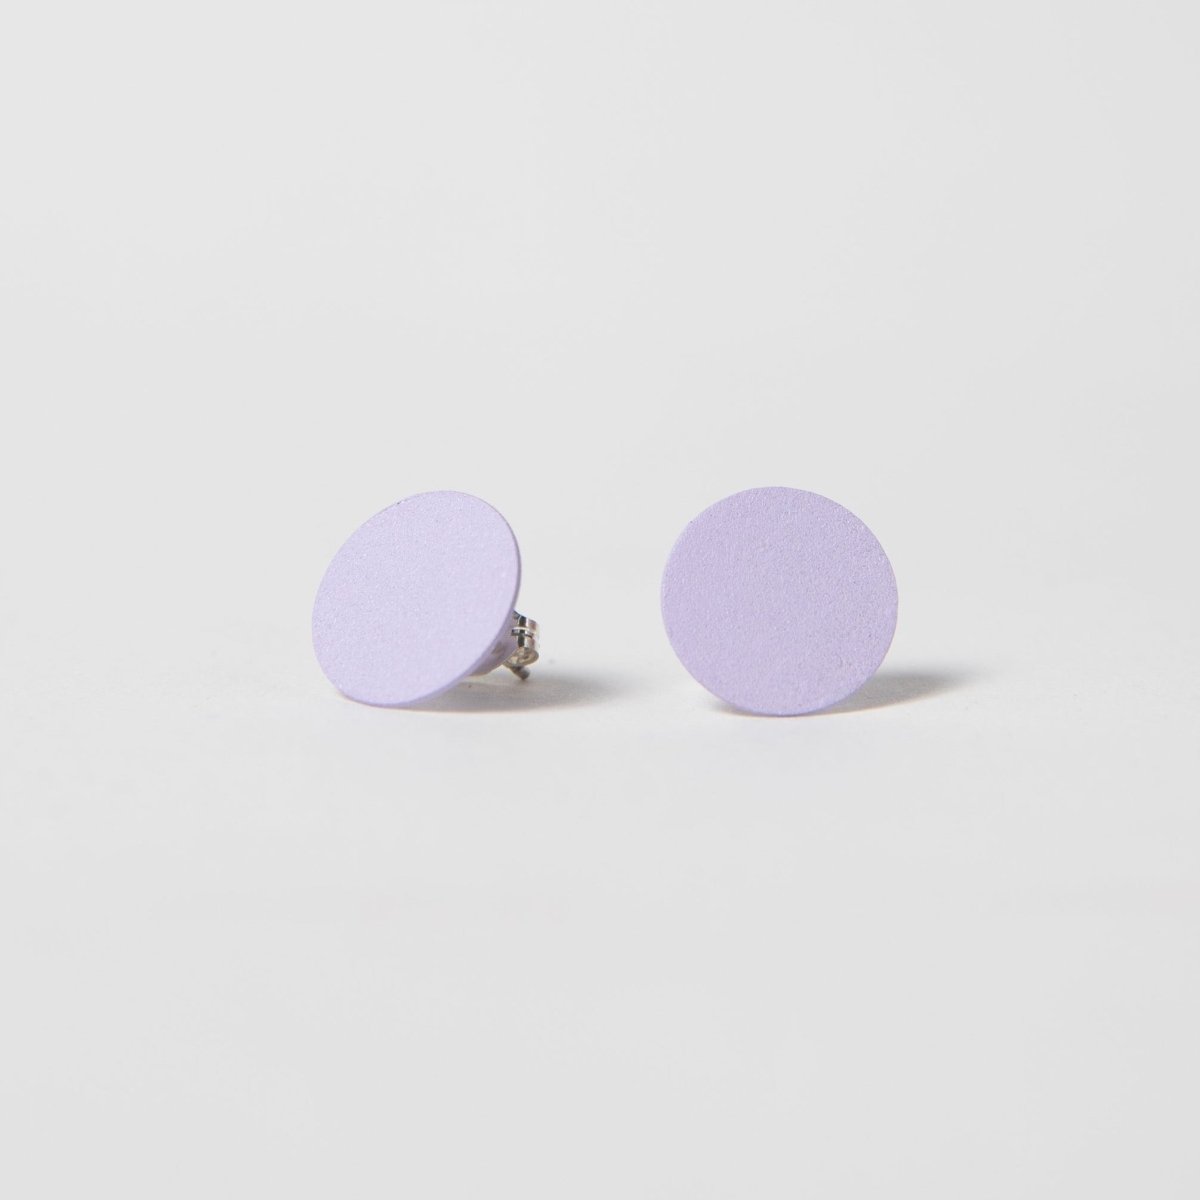 A round flat stud earring in pale purple. The Dot Earrings in Lilac are designed and crafted by Pretti.cool in Houston, Texas